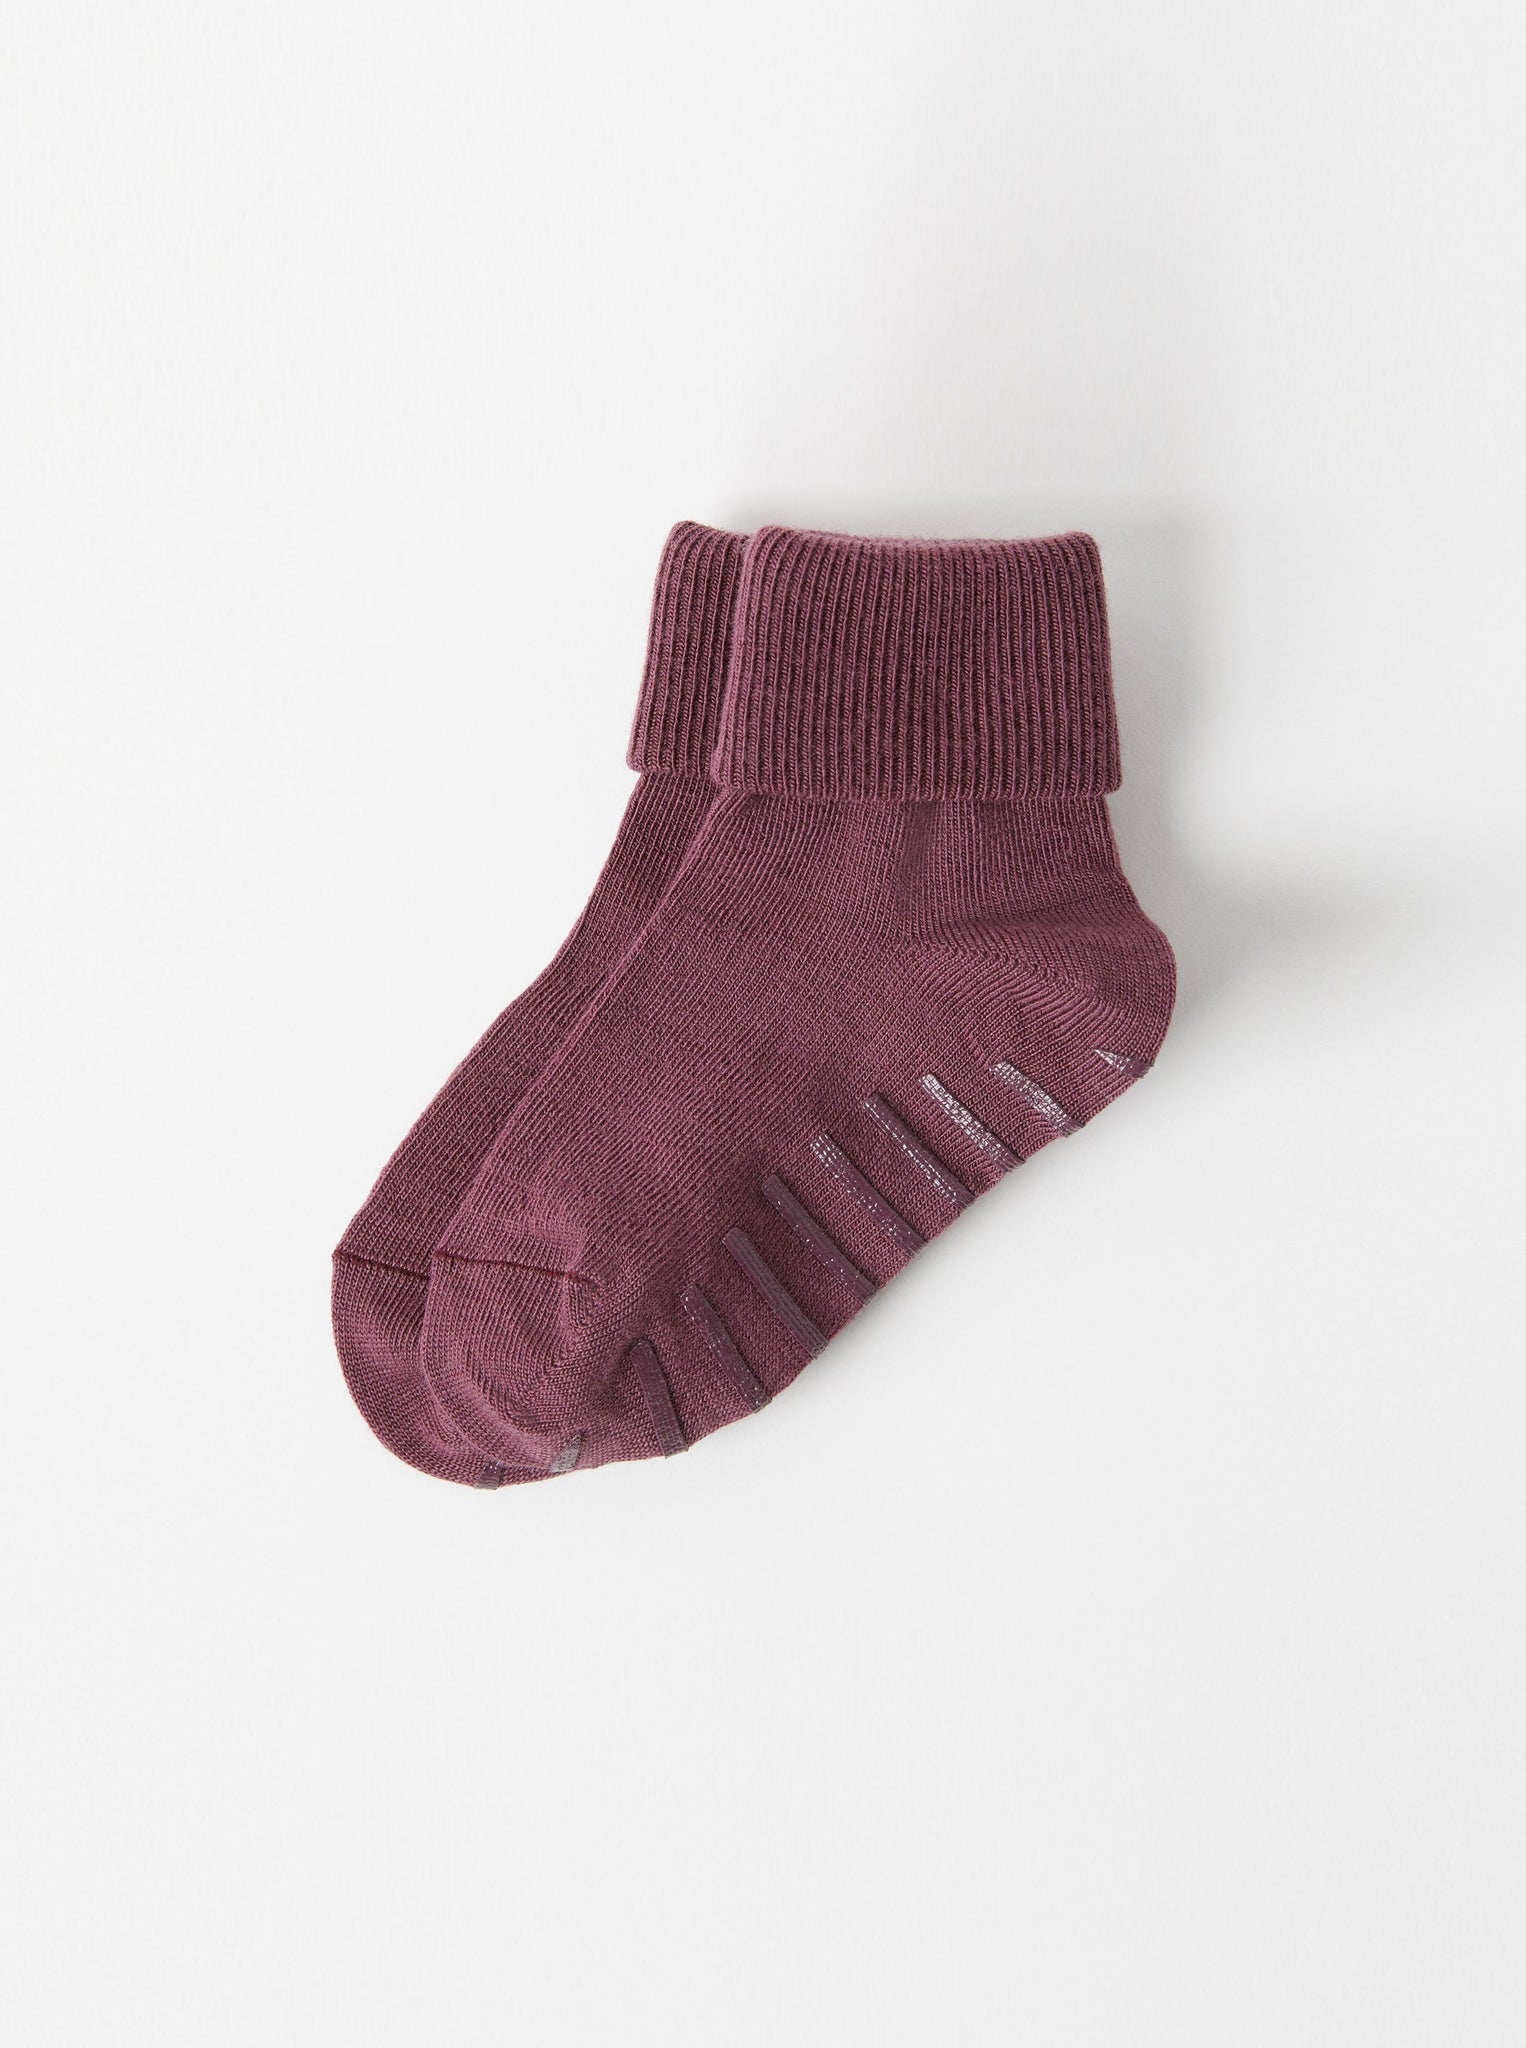 Burgundy Merino Wool Baby Socks from the Polarn O. Pyret kidswear collection. Sustainably produced kids outerwear.